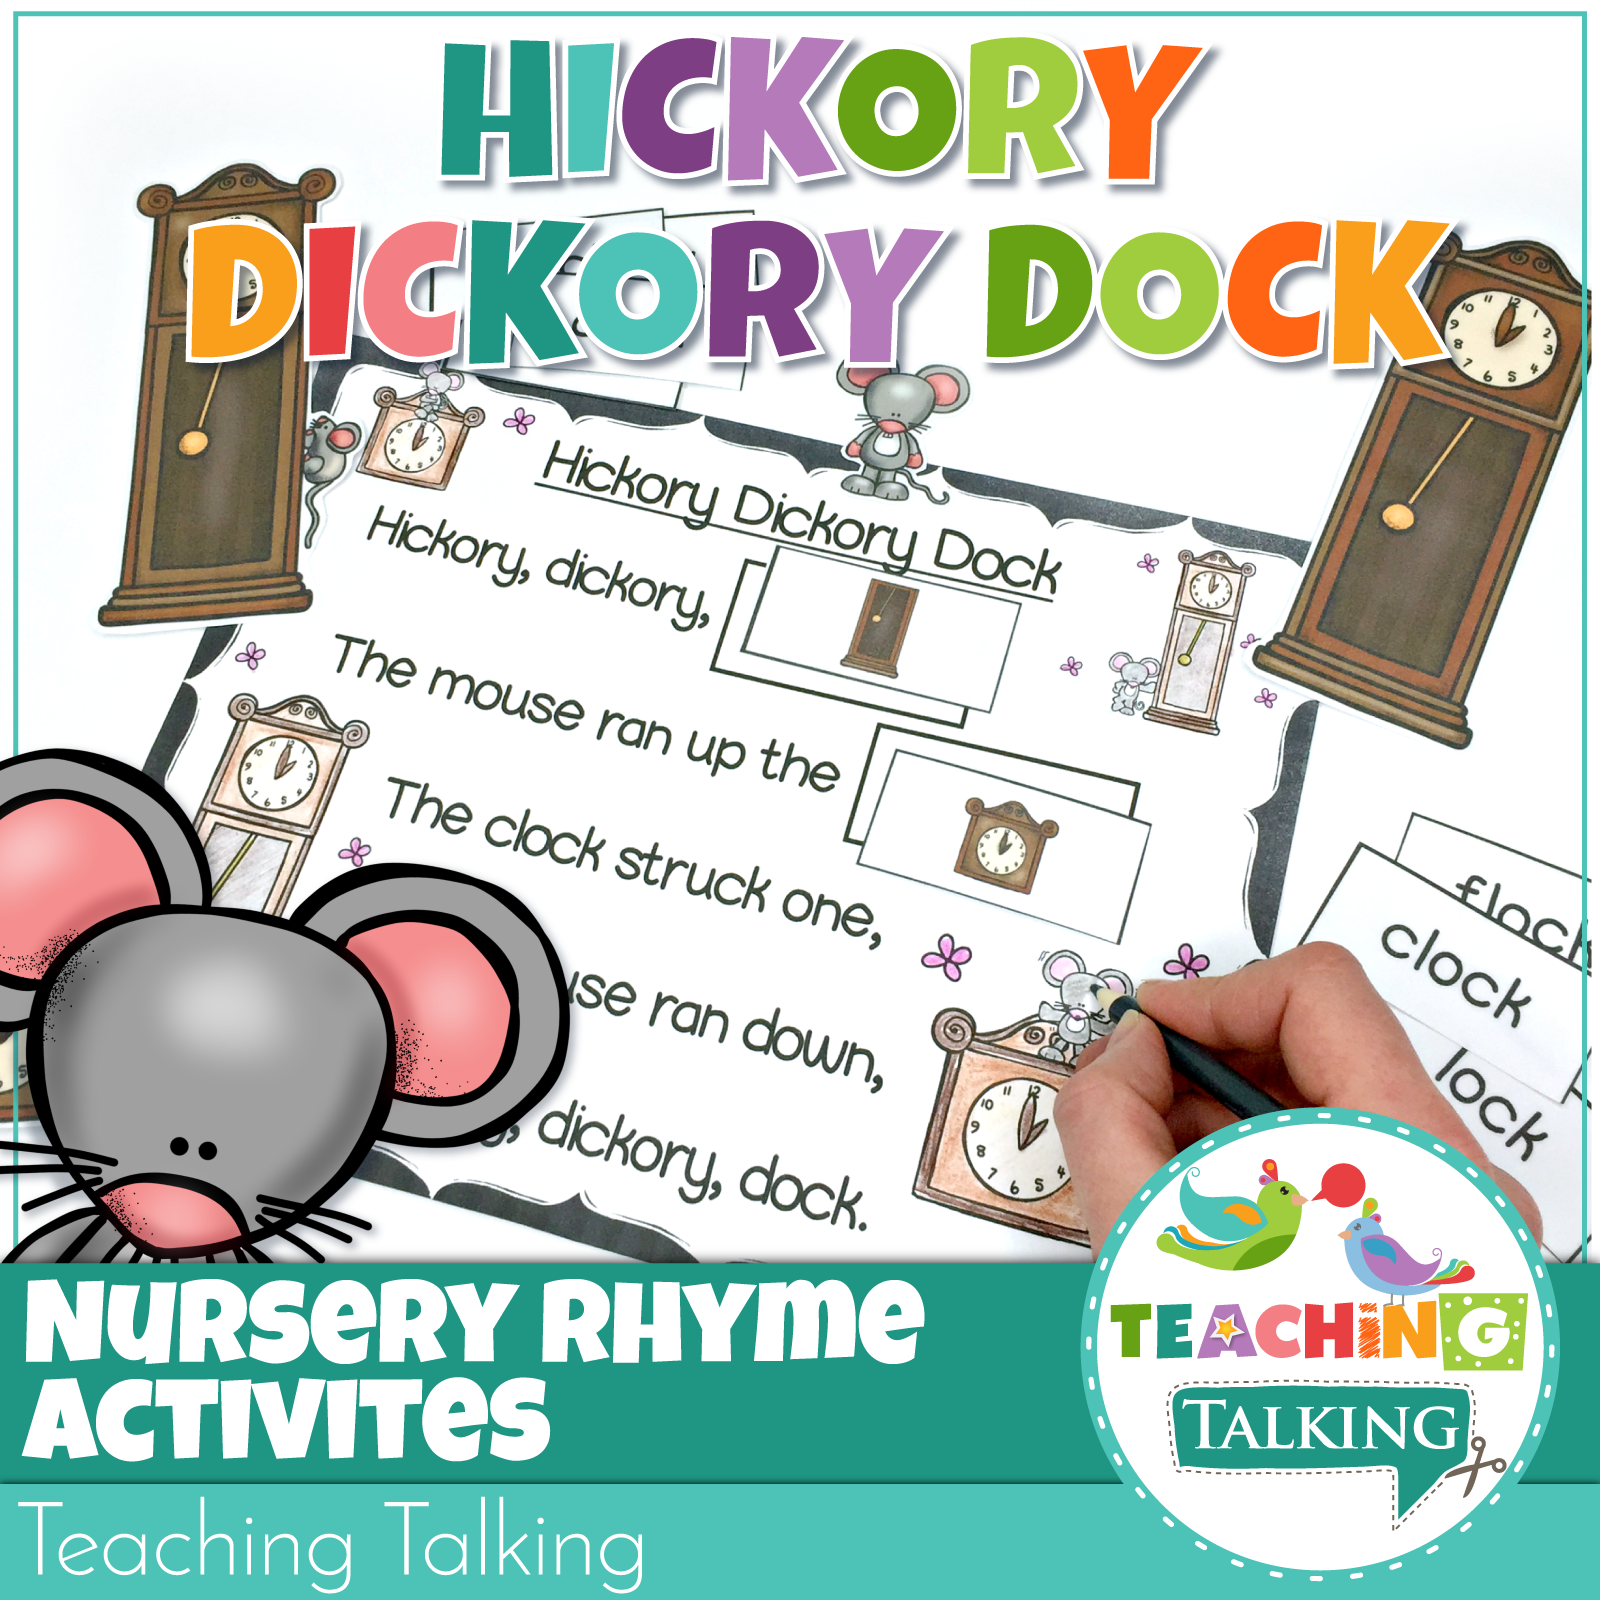 Teaching Talking Printable Nursery Rhyme Activities for Hickory Dickory Dock